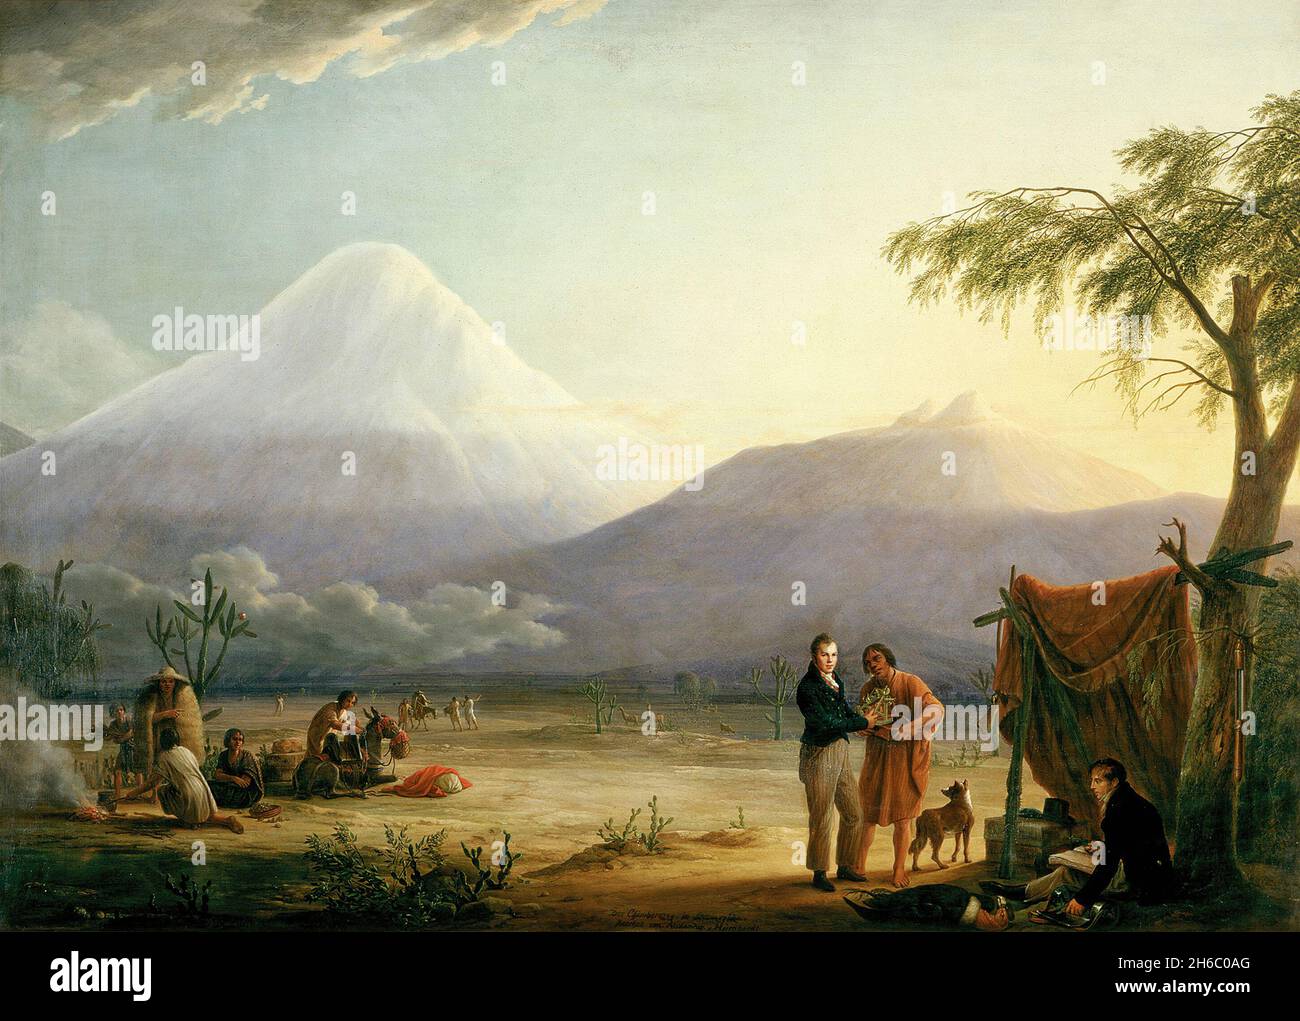 A painting of Alexander von Humboldt and his fellow scientist Aimé Bonpland and the volcano Chimborazo in Ecuador. painting by Friedrich Georg Weitsch Stock Photo